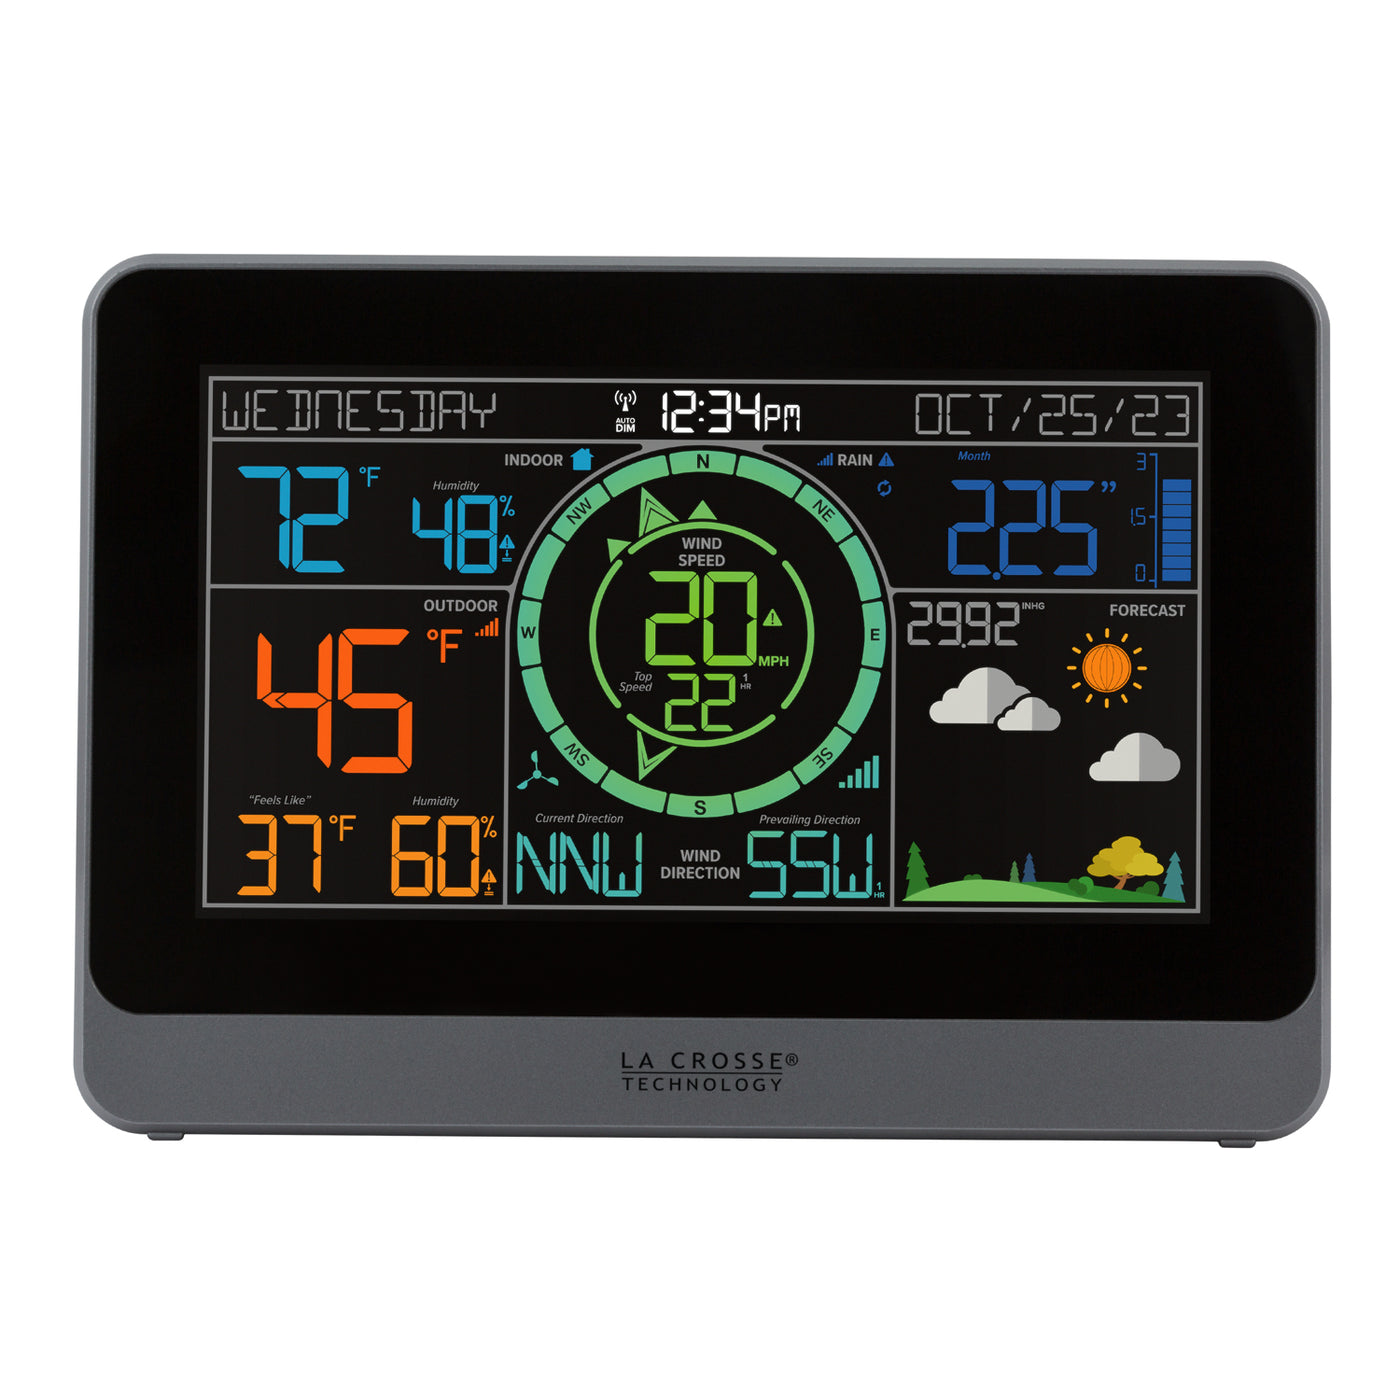 328-1415 Professional Color Weather Station - display